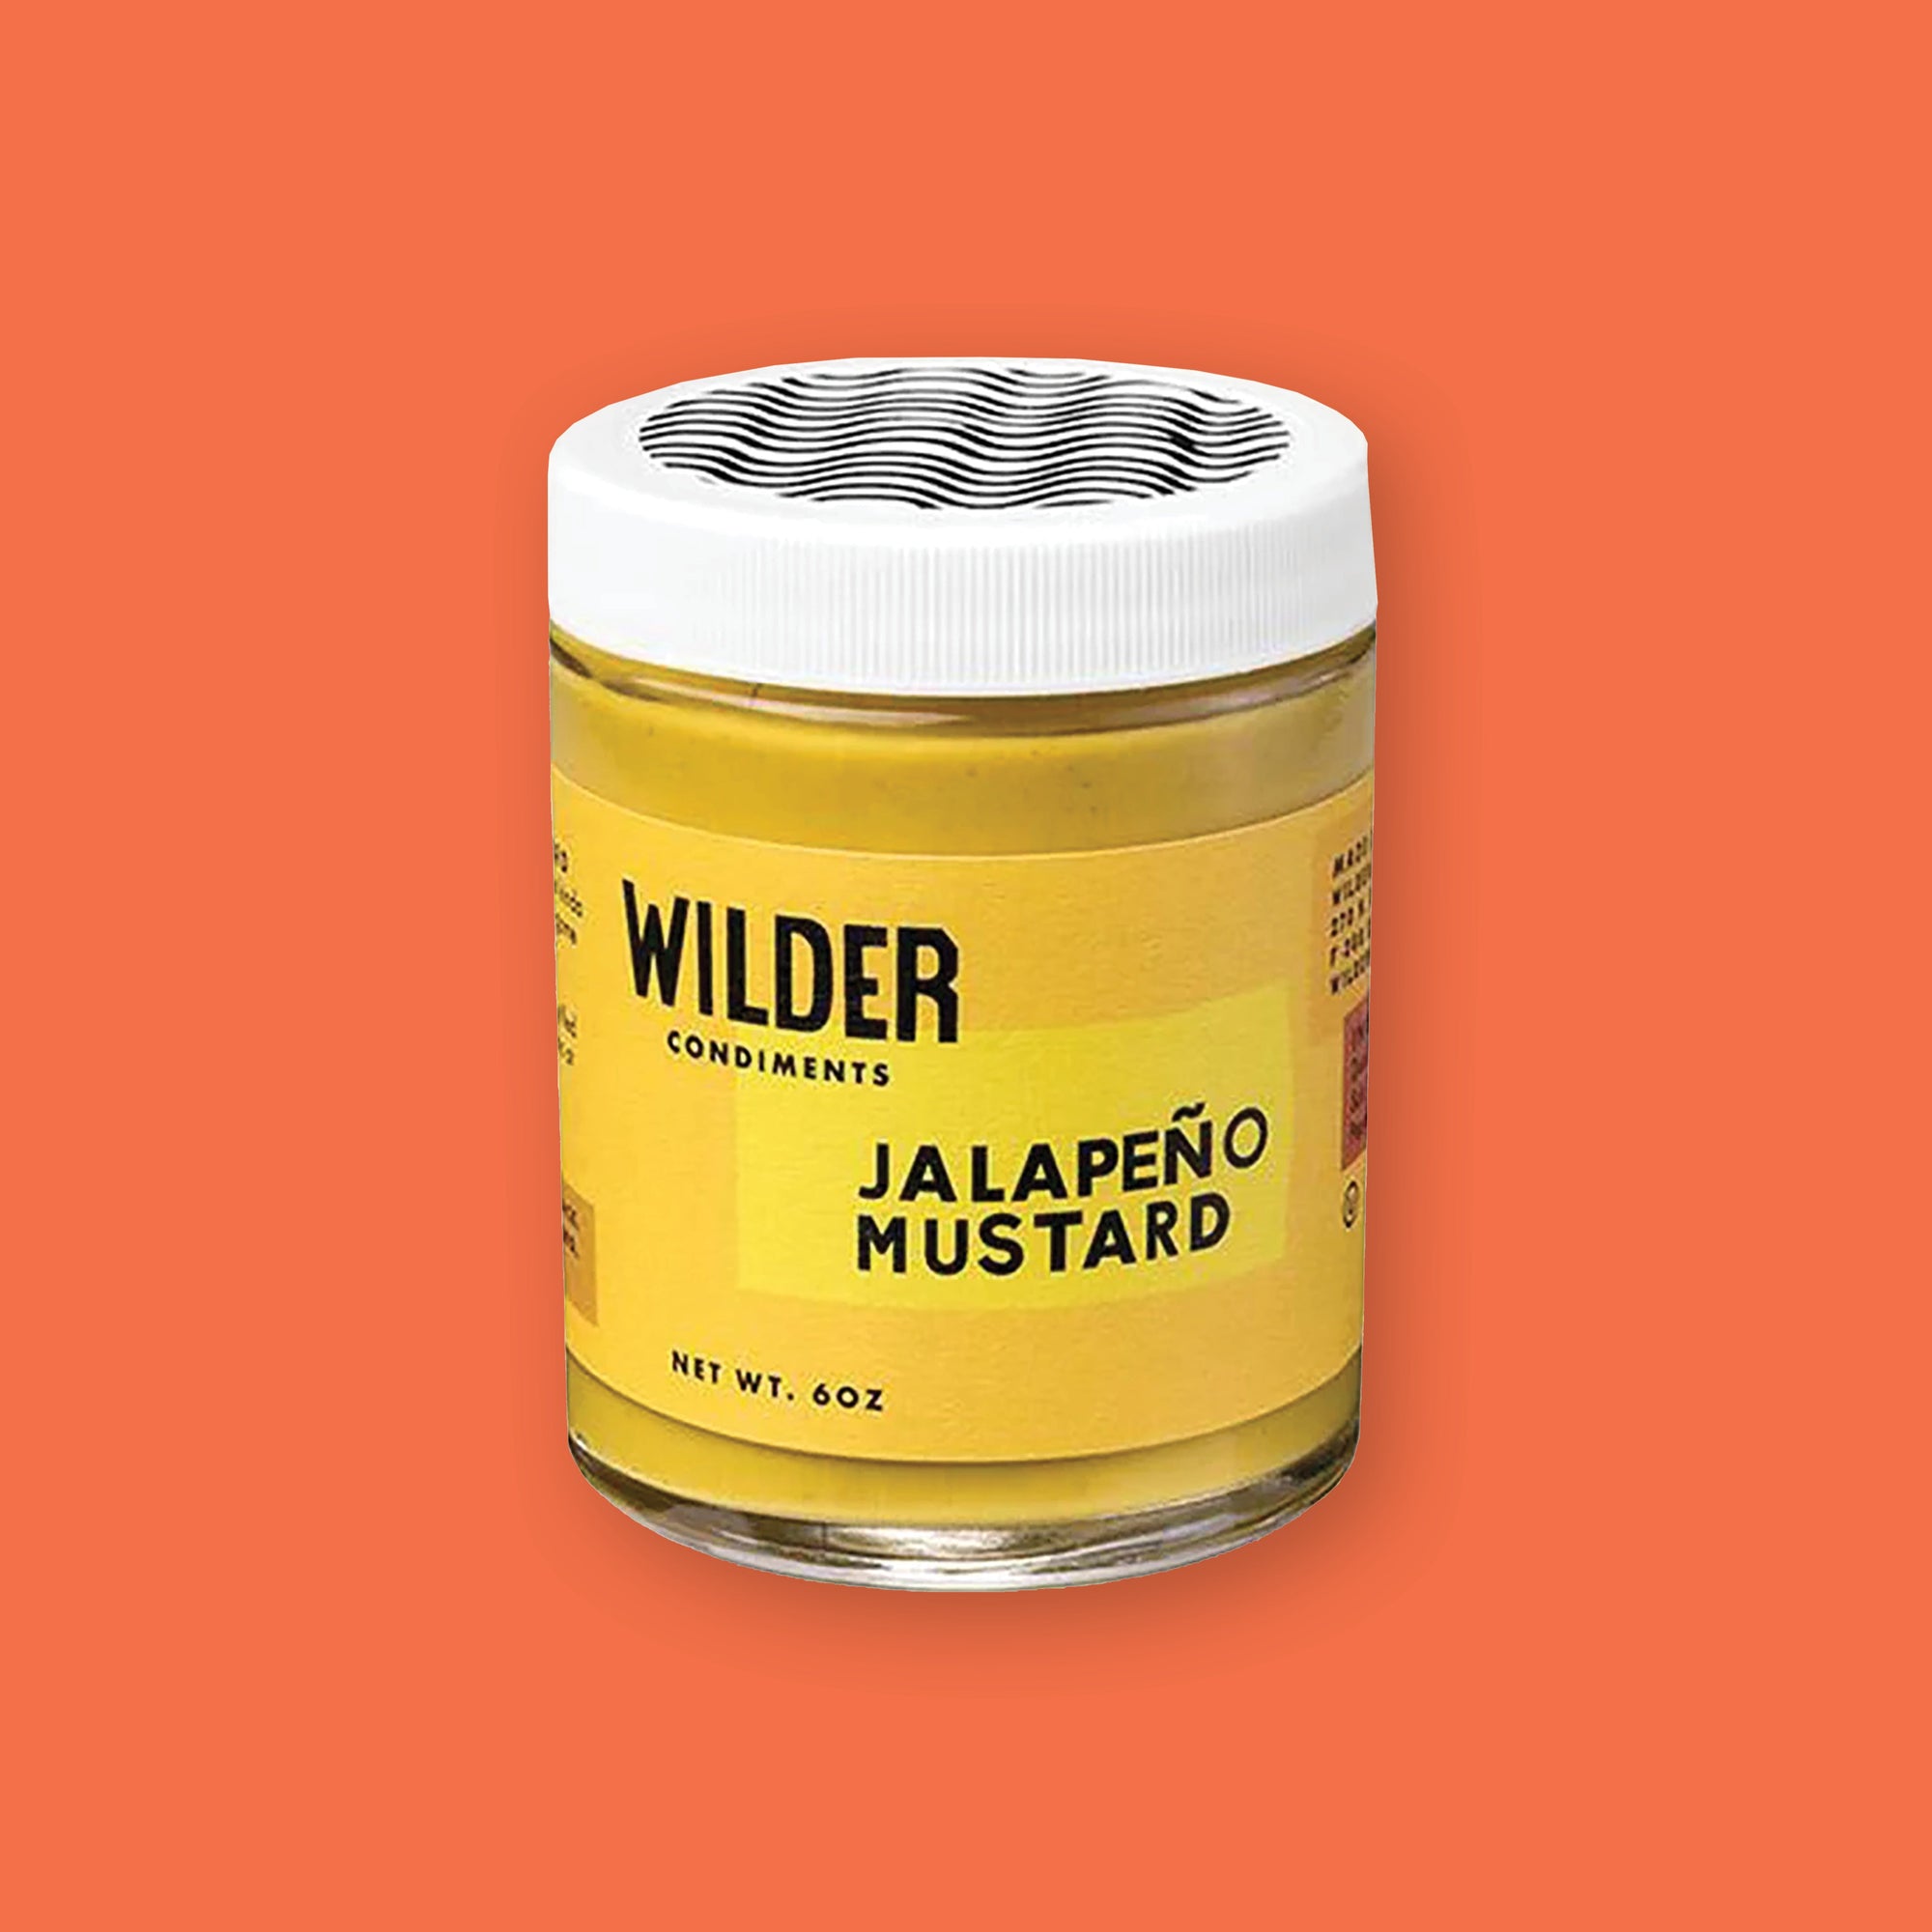 On an orangey-red background sits a jar. This jar has a white lid with black wavy lines on top and a mustard yellow label. On the label it says "WILDER CONDIMENTS" and "JALAPENO MUSTARD" in black, all caps block font. Net wt. 6oz